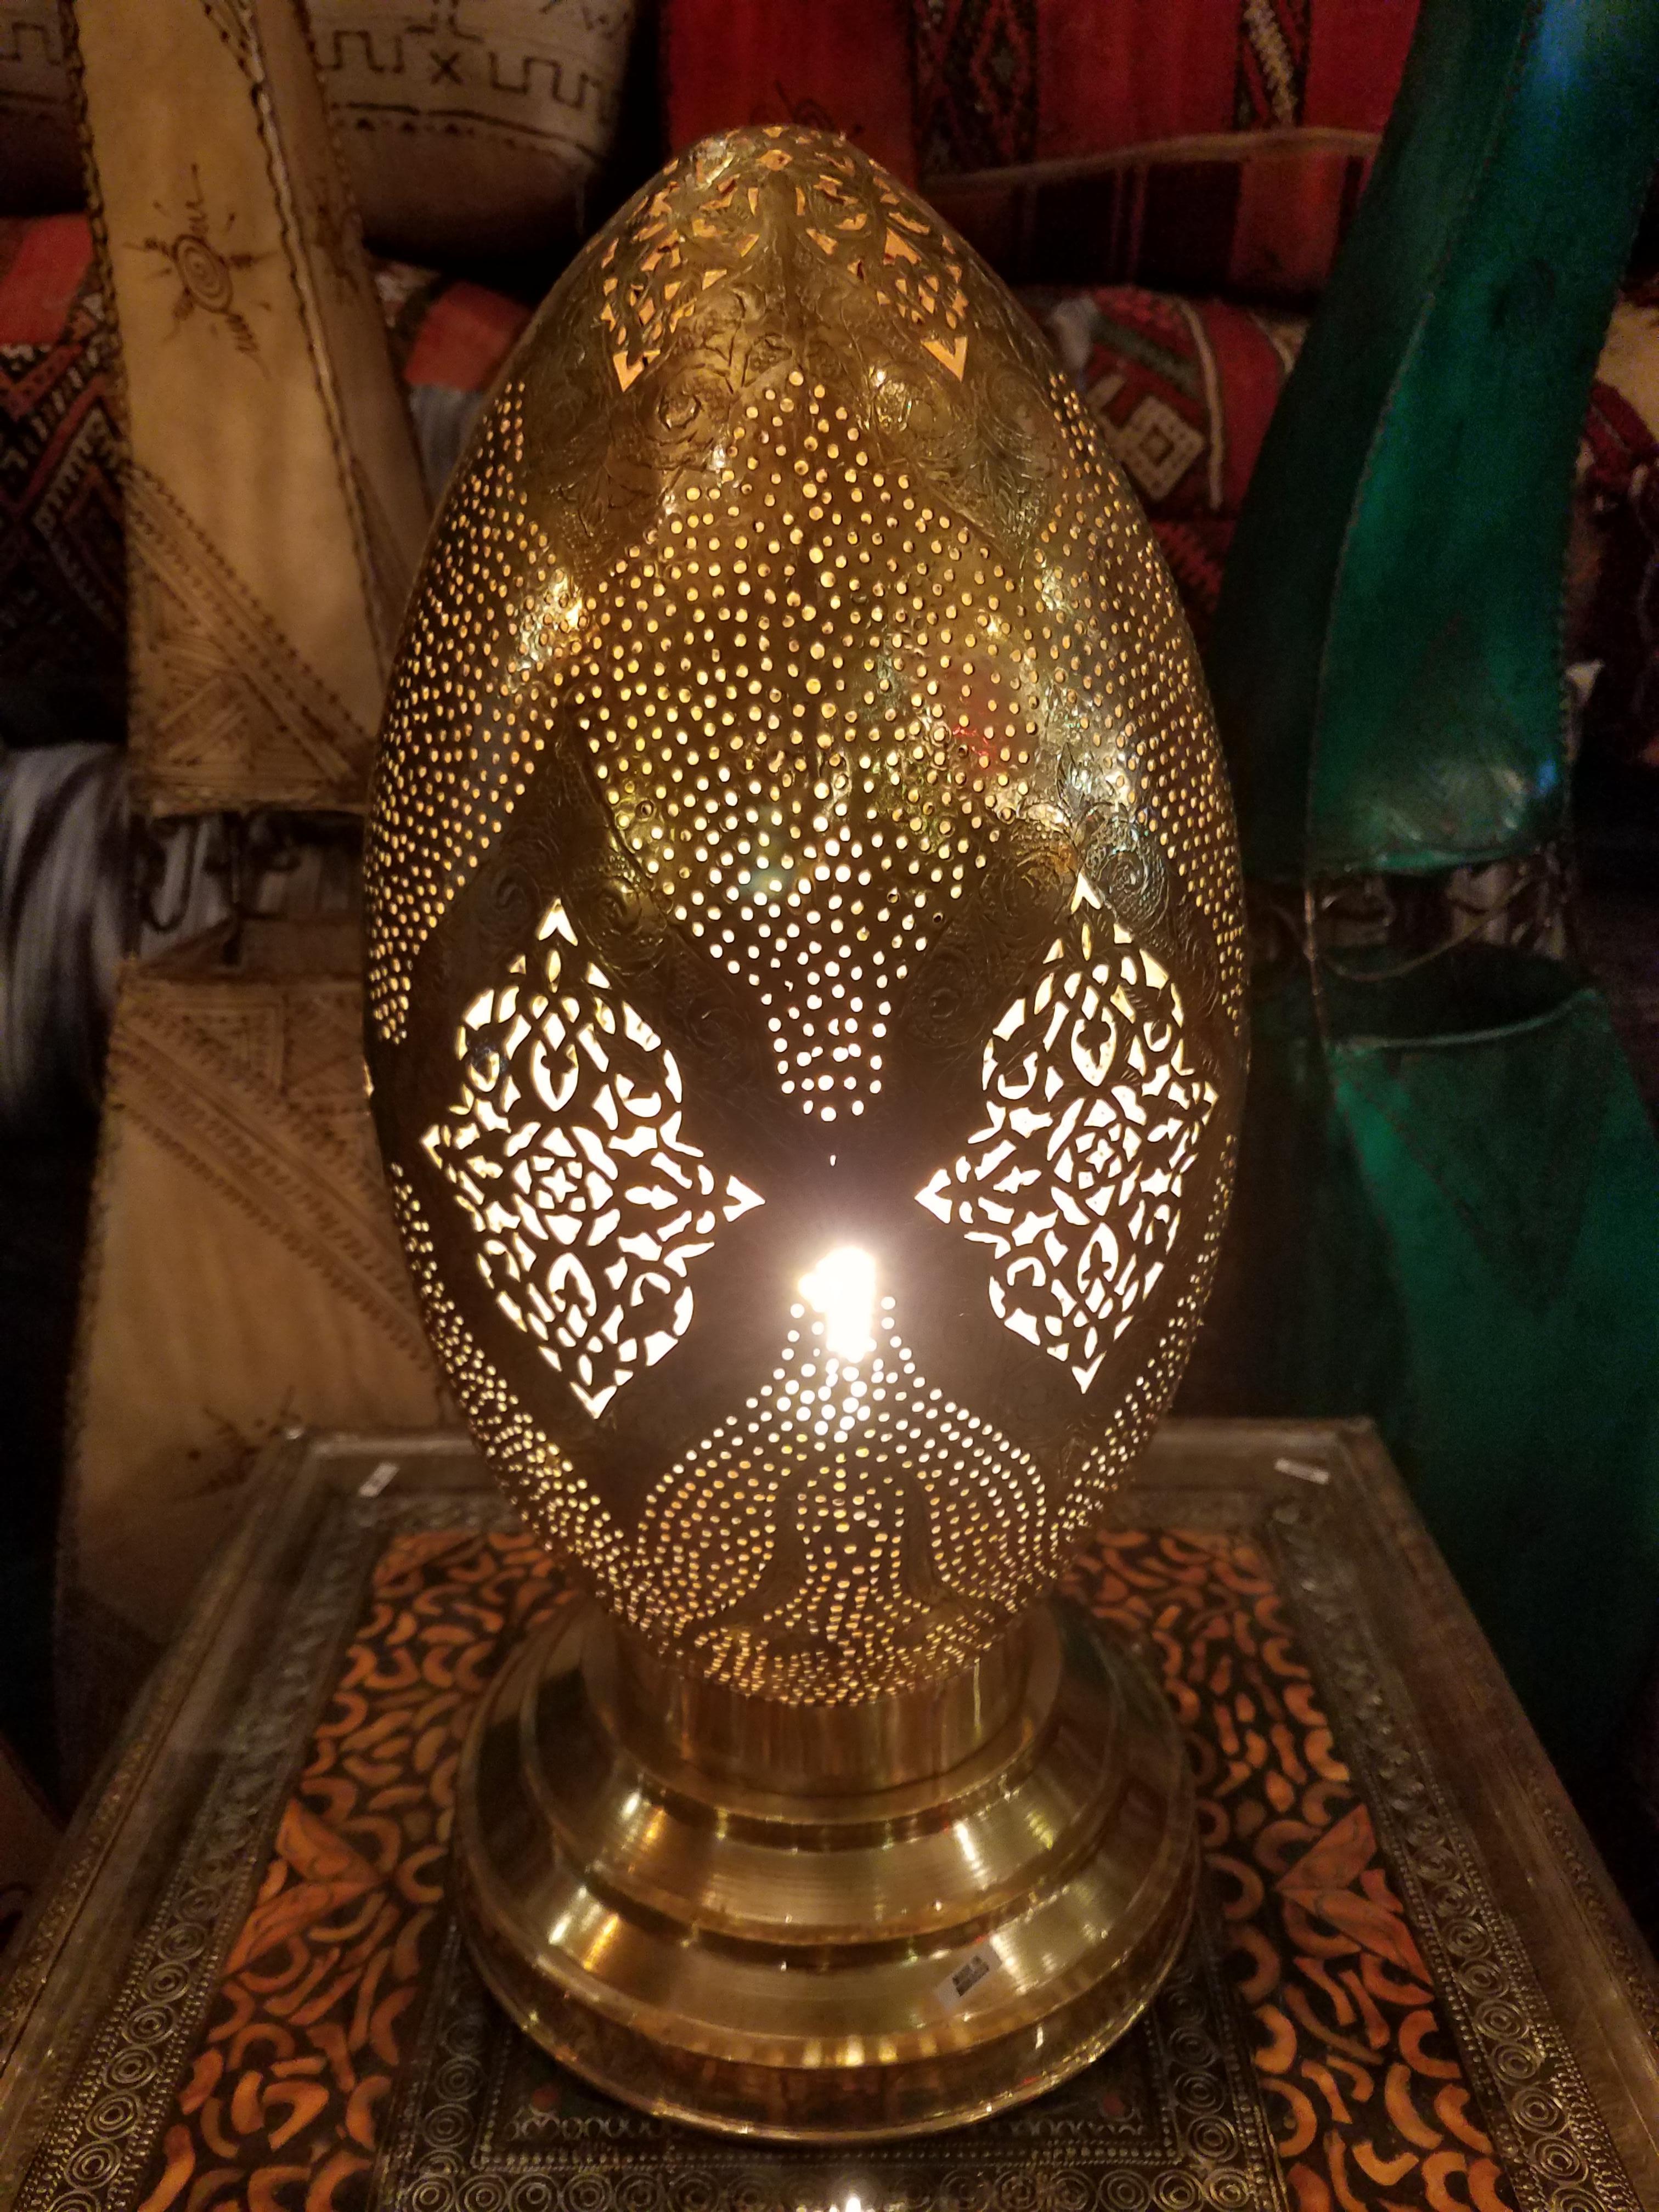 Great for use on a nightstand, side console, or even as a bathroom soft light. This beautiful Moroccan table lamp is made from pure copper, and is a serious show-stopper anywhere in your home. Each is handmade using ancient artisan methods which